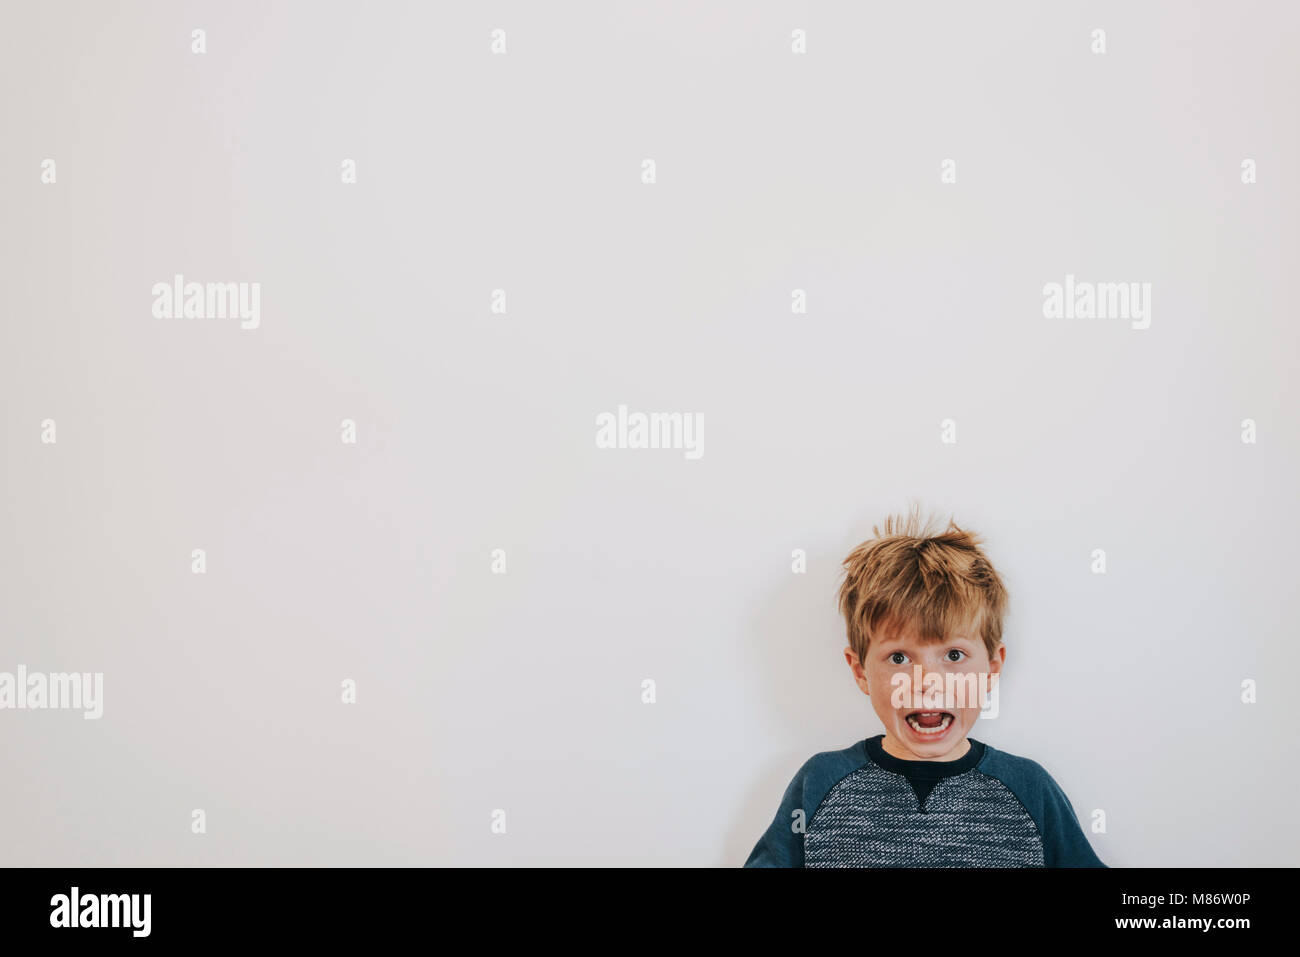 Portrait of a boy with freckles shouting Stock Photo